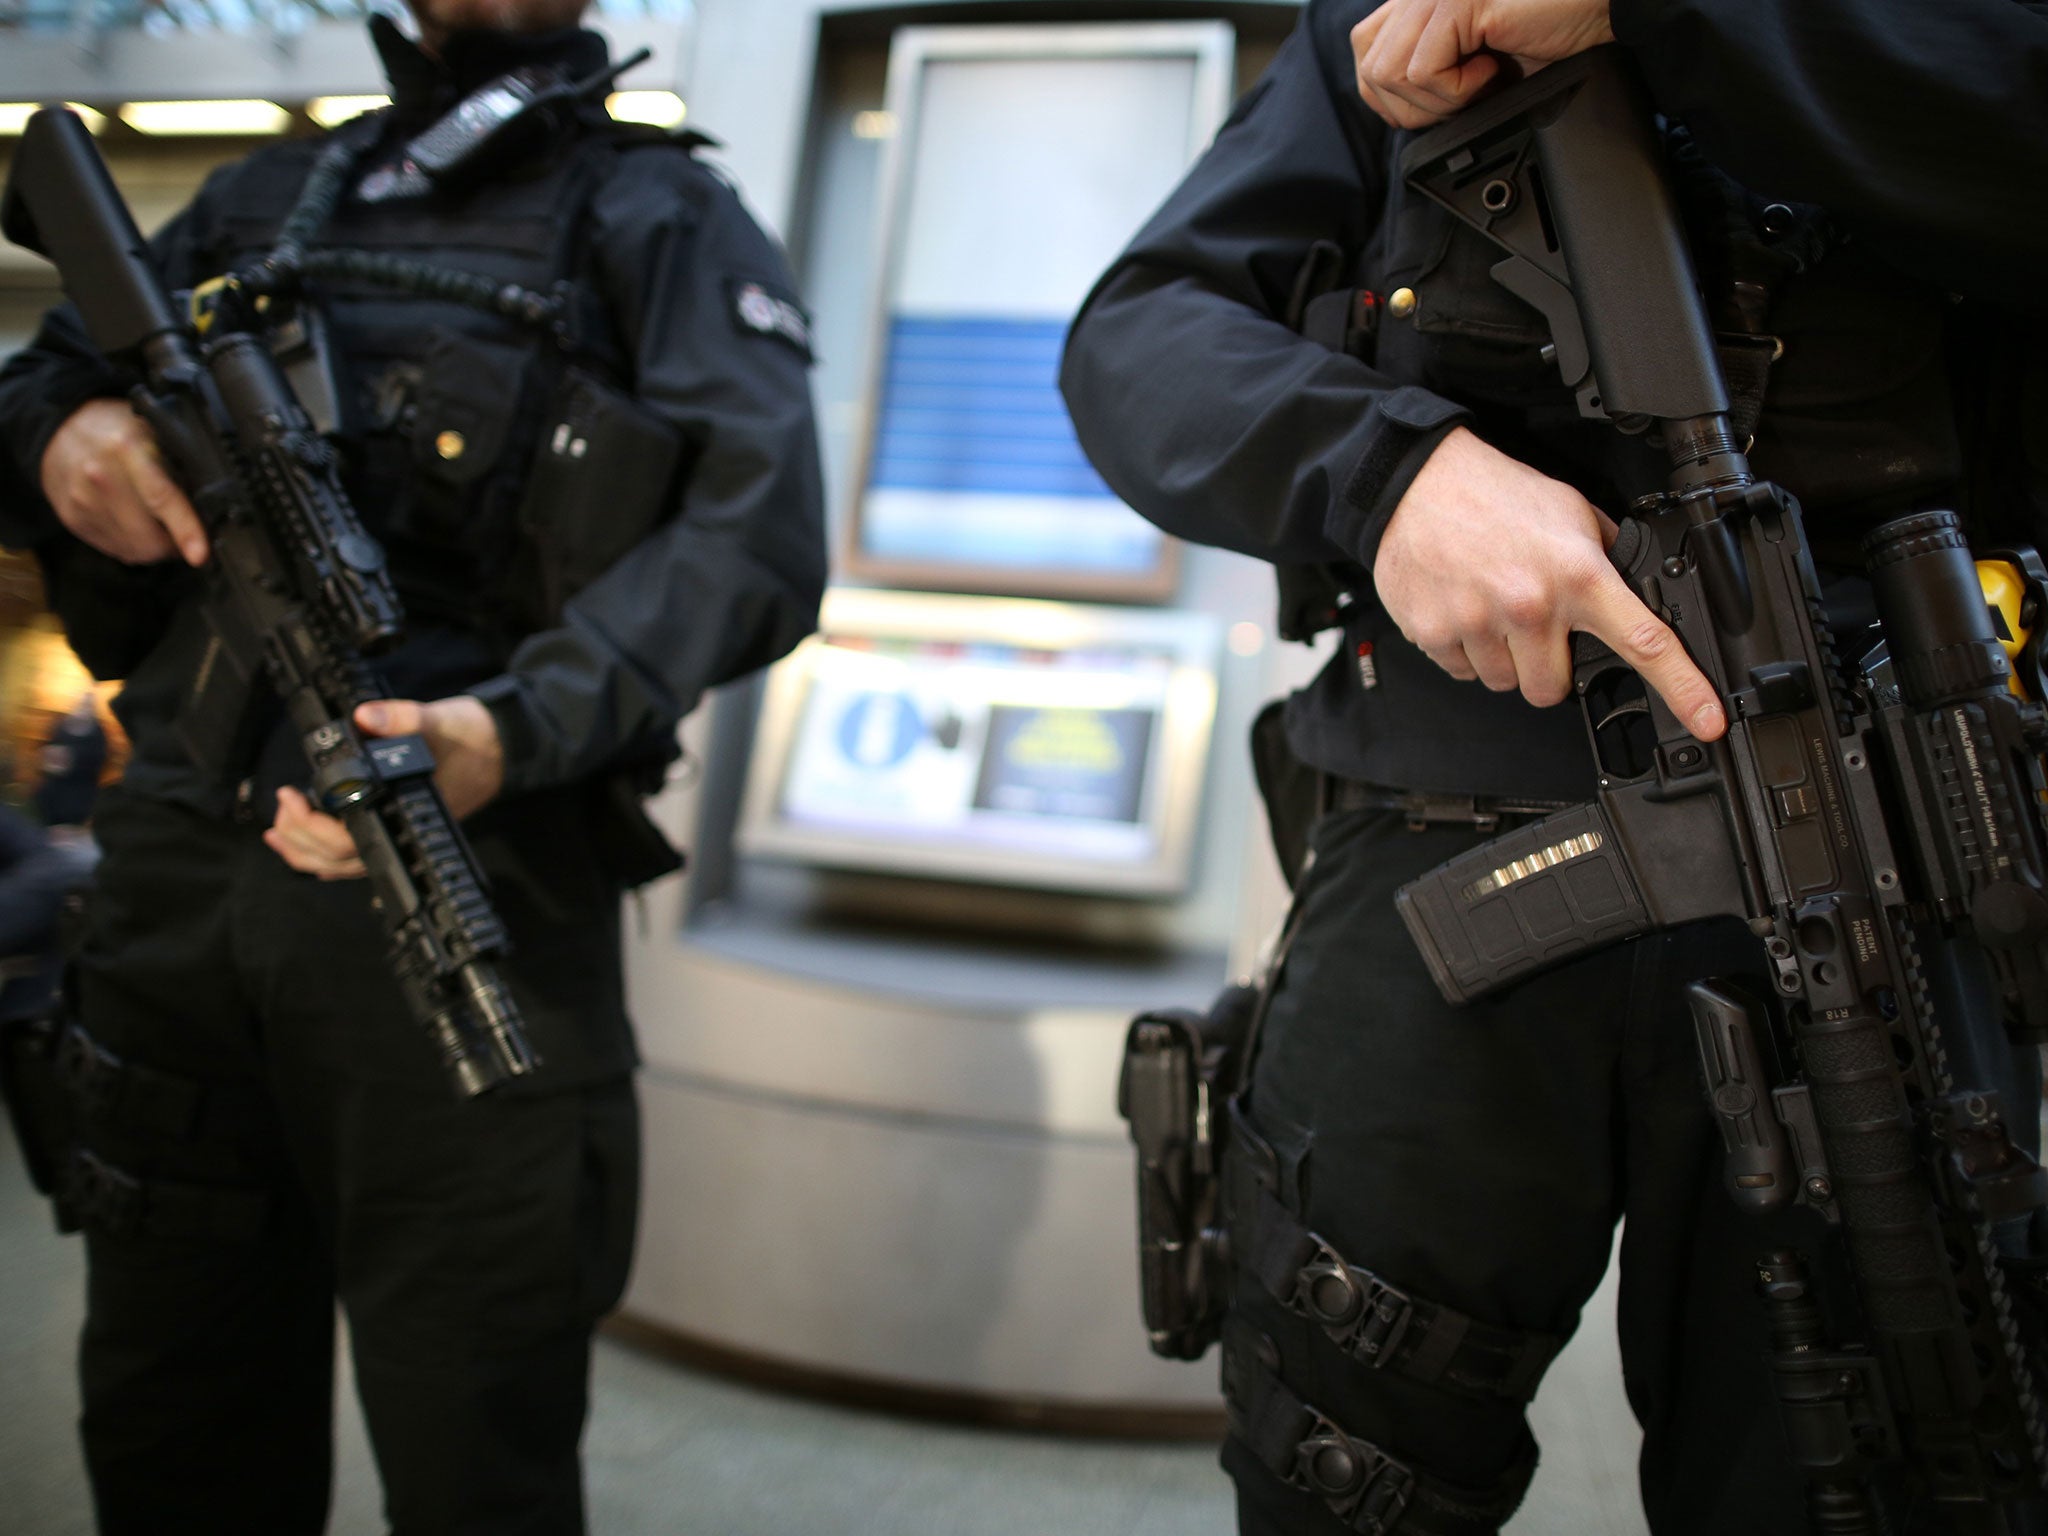 Armed British Transport Police officers patrol the Eurostar platforms at St Pancras railway station on January 8, 2015 in London, United Kingdom